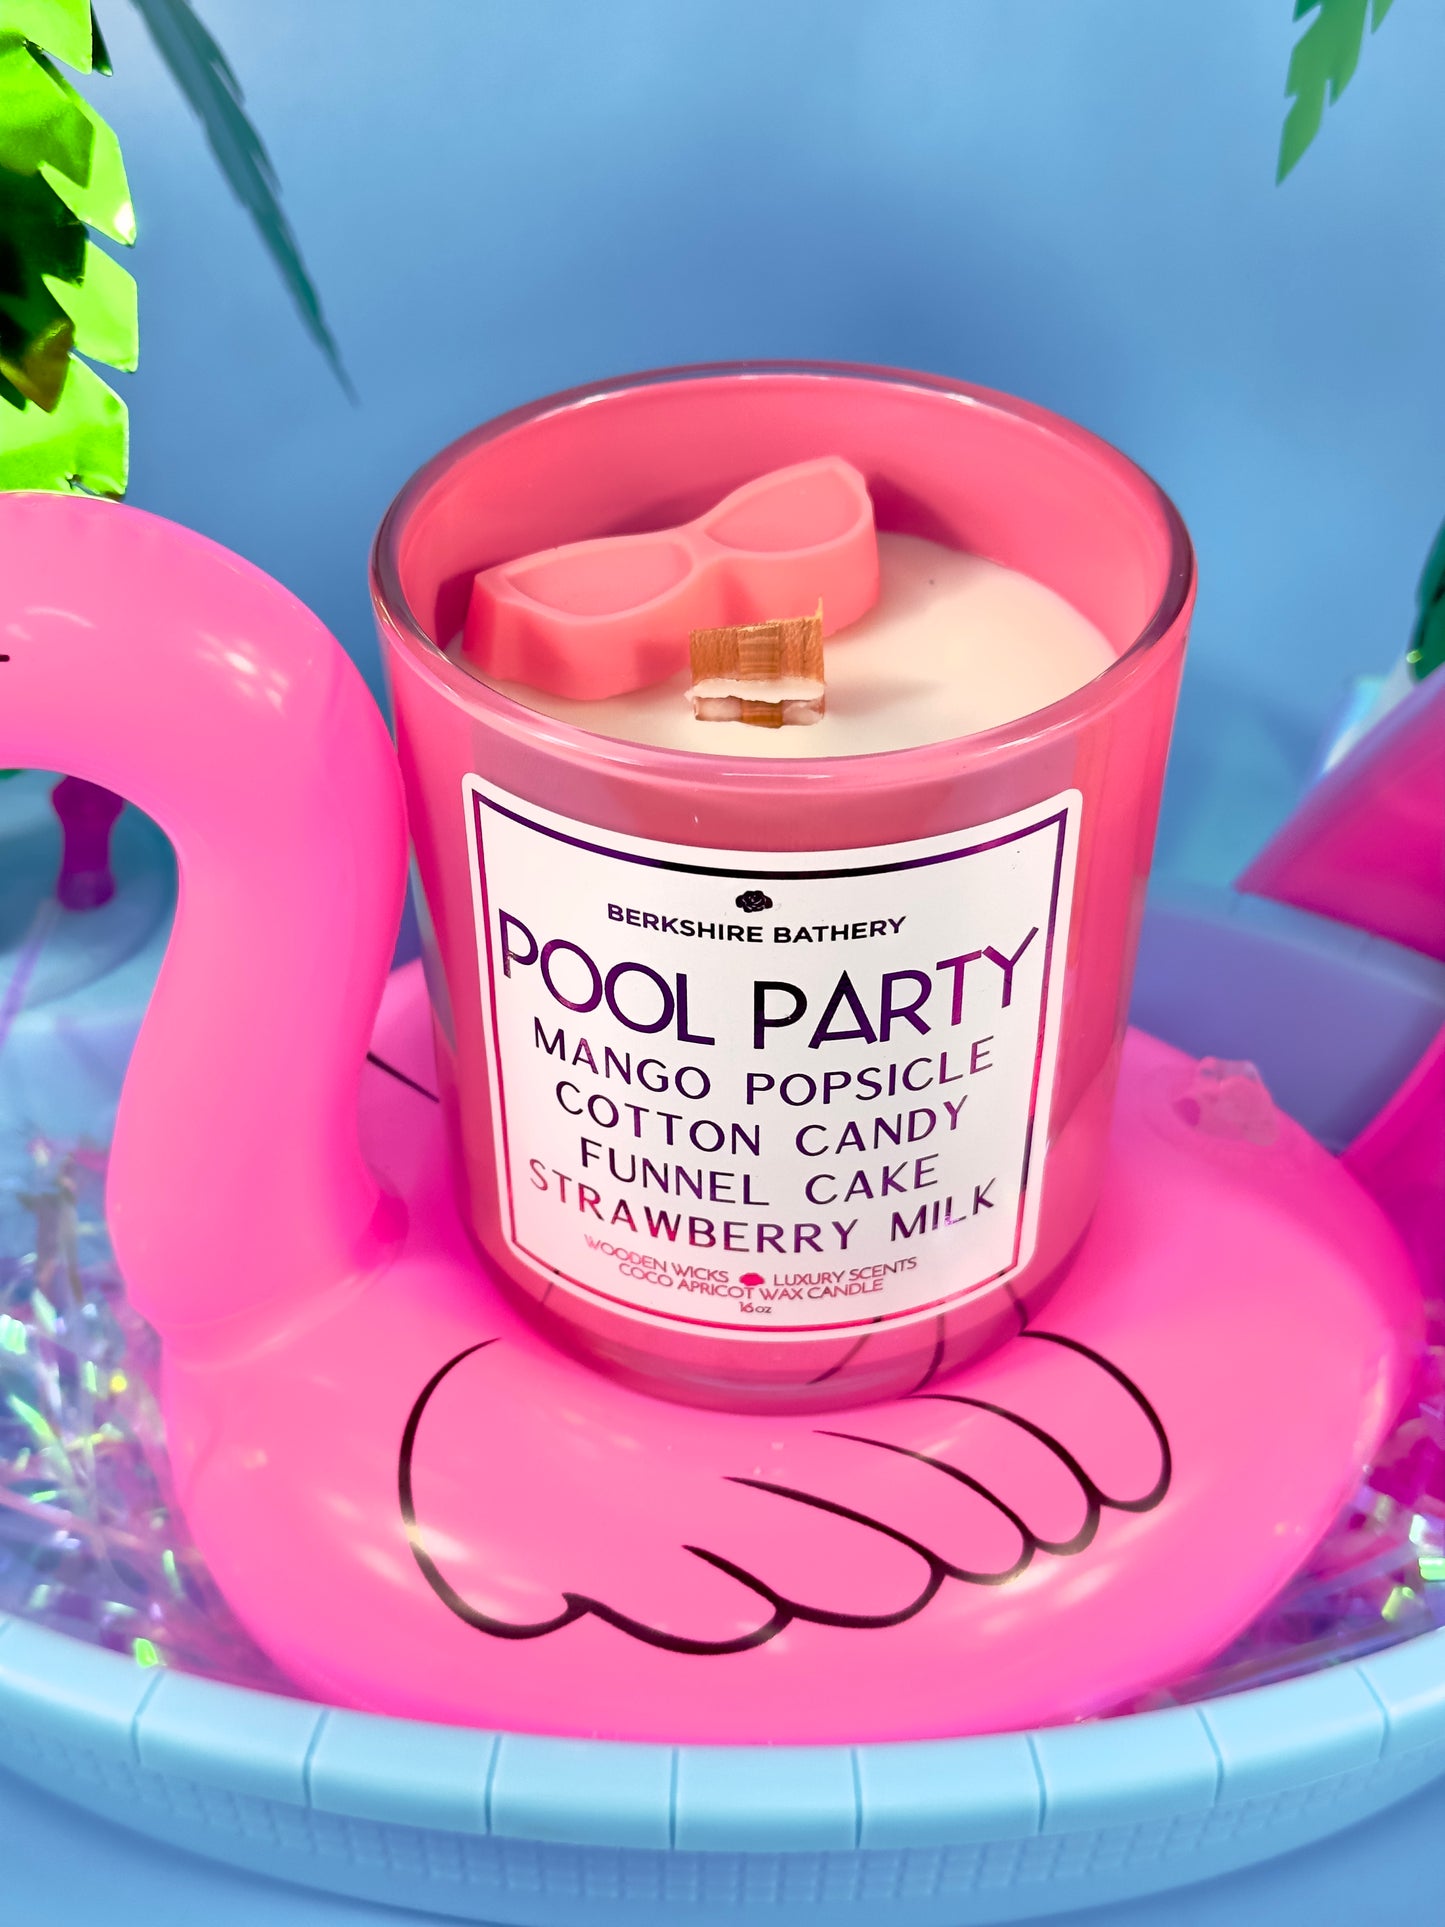 POOL PARTY | 16oz Wood Wick Candle